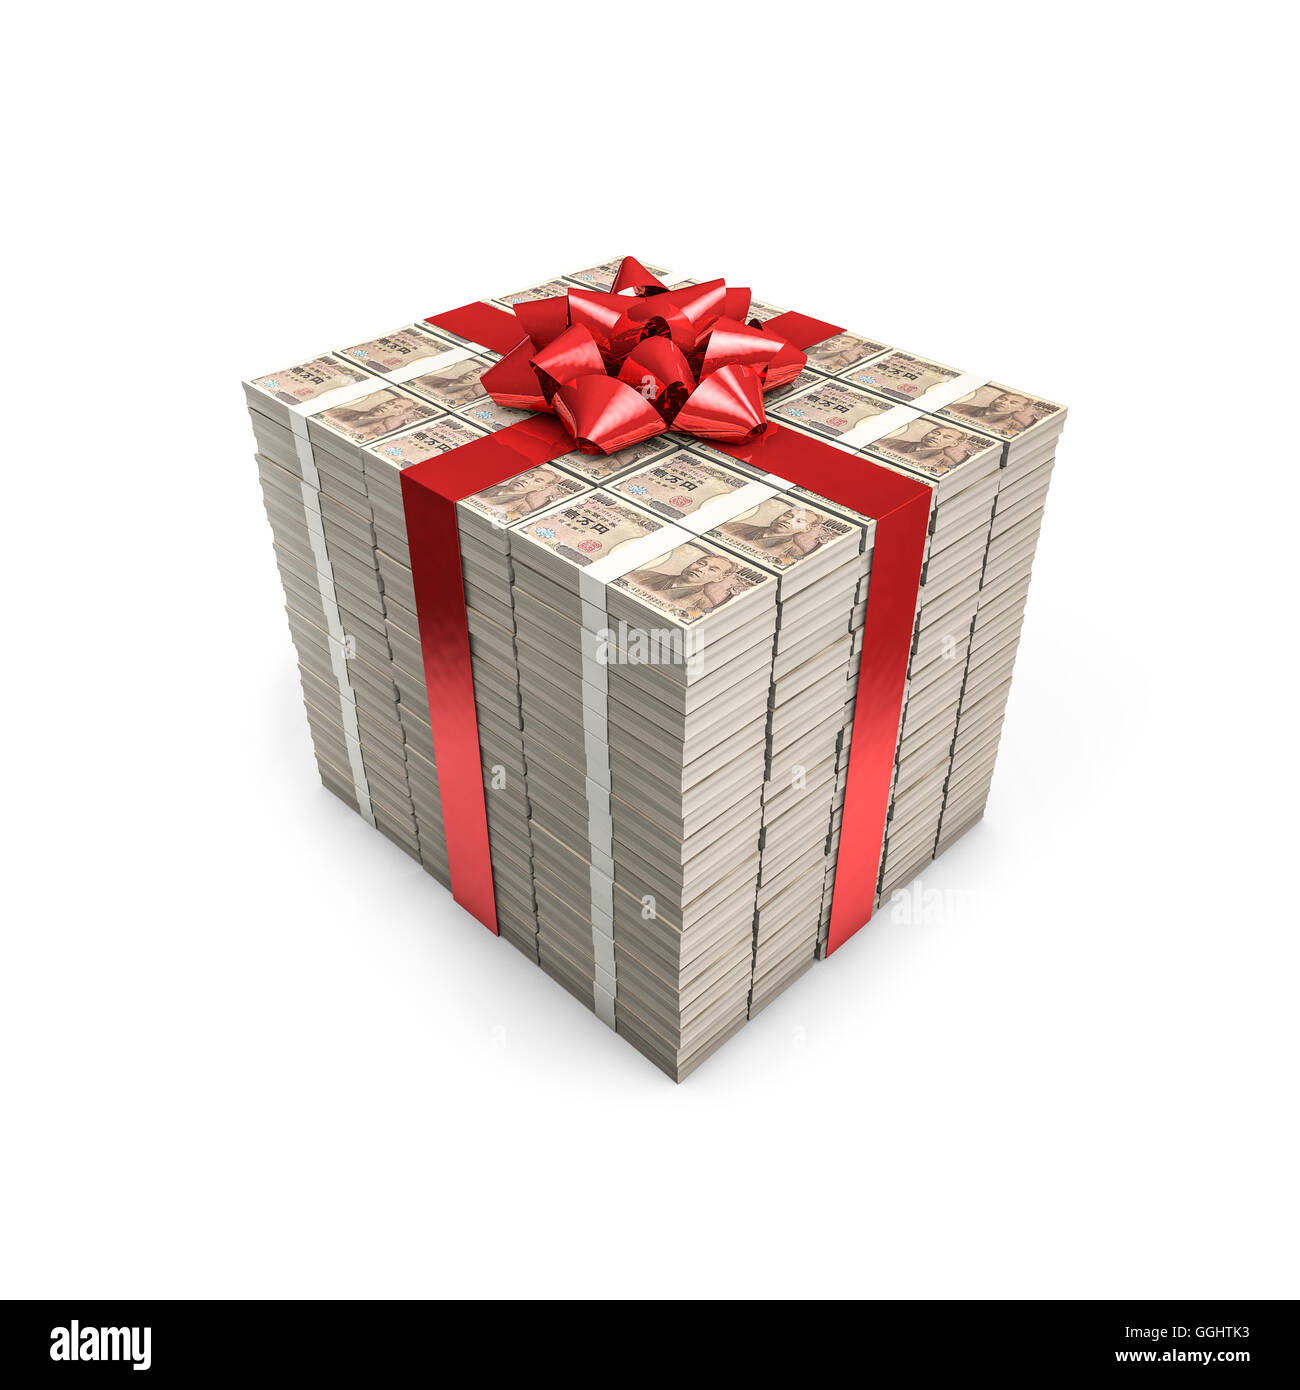 Money gift yen / 3D illustration of stacks of ten thousand yen notes tied with ribbon Stock Photo